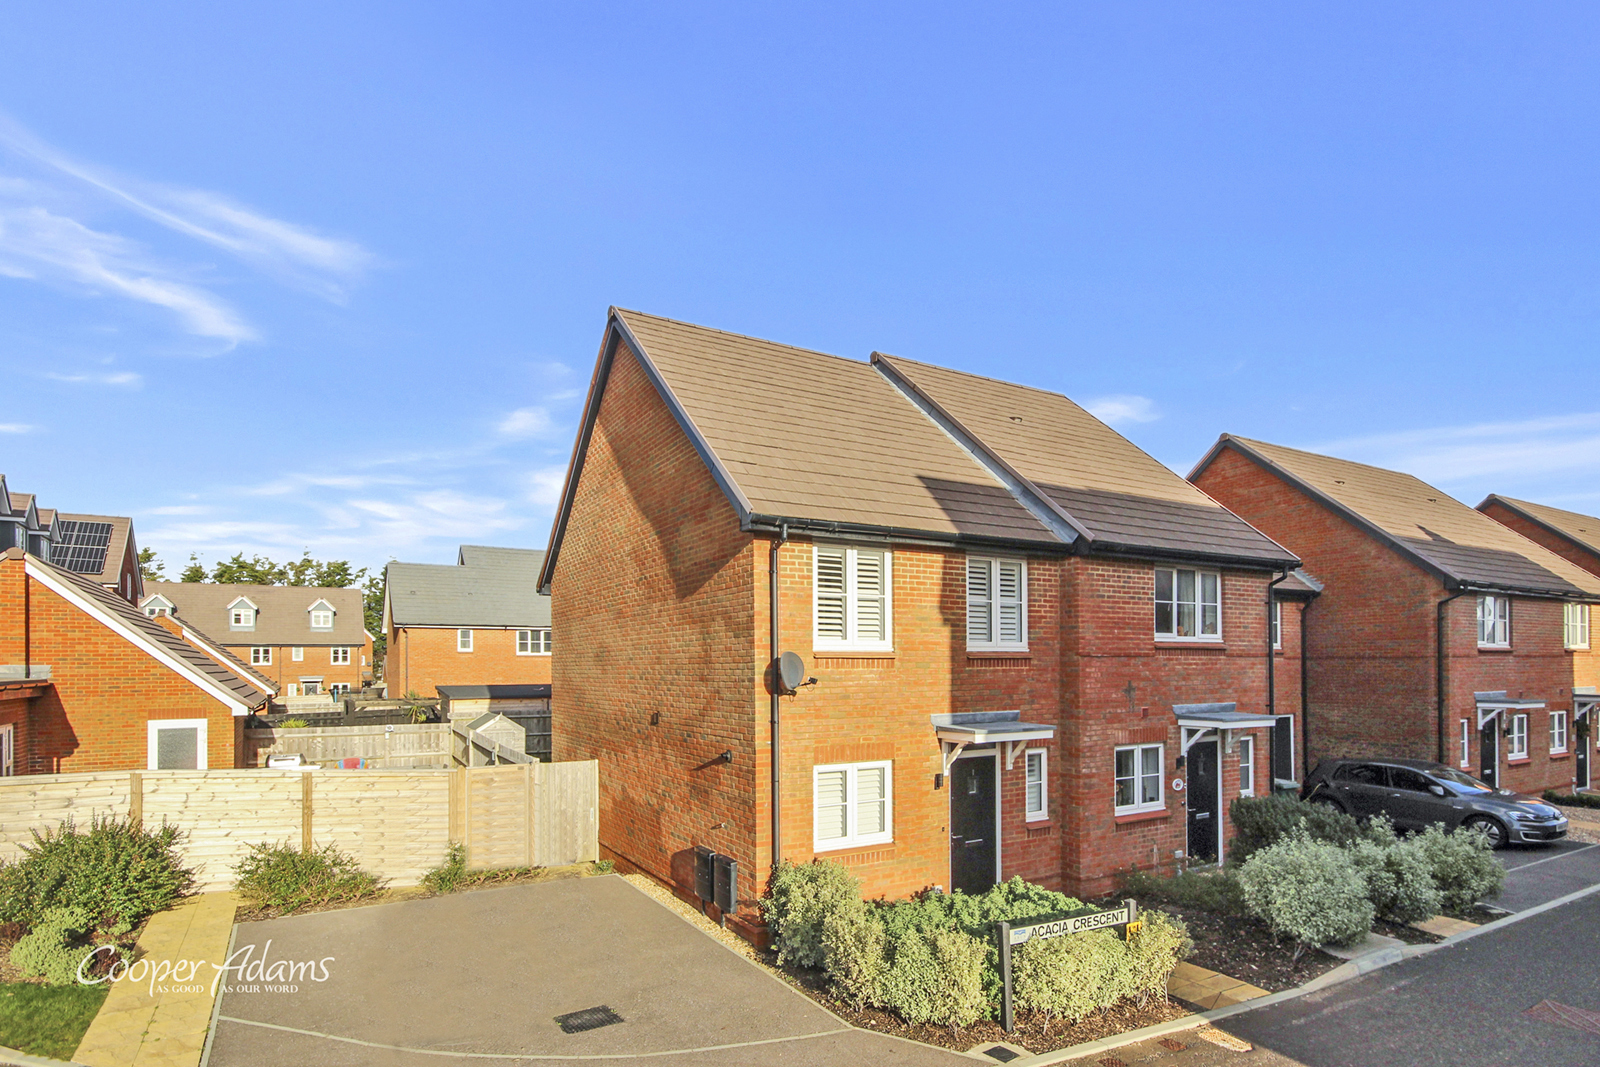 3 bed house for sale in Acacia Crescent, Angmering - Property Image 1